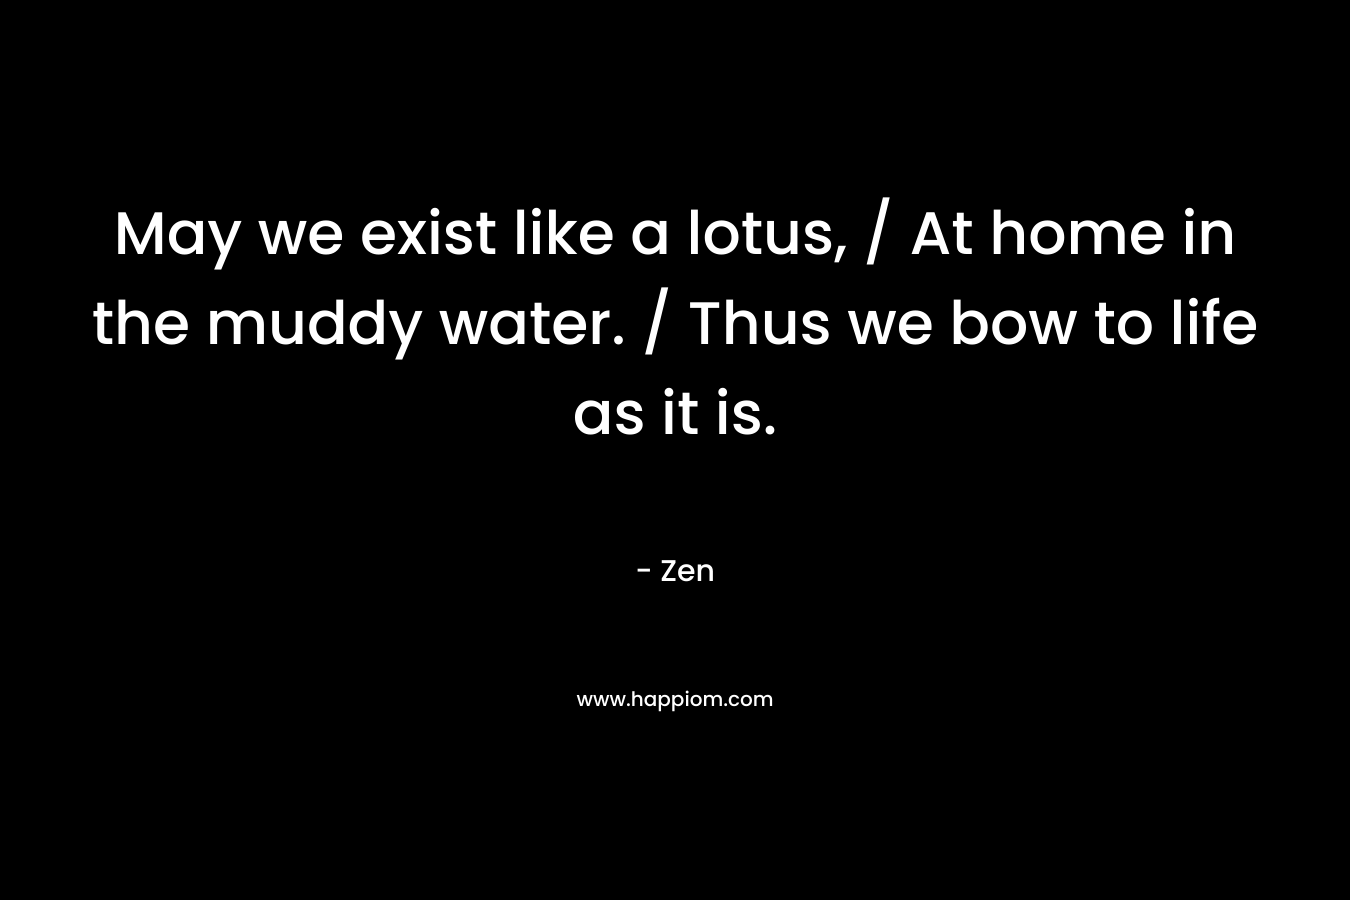 May we exist like a lotus, / At home in the muddy water. / Thus we bow to life as it is. – Zen